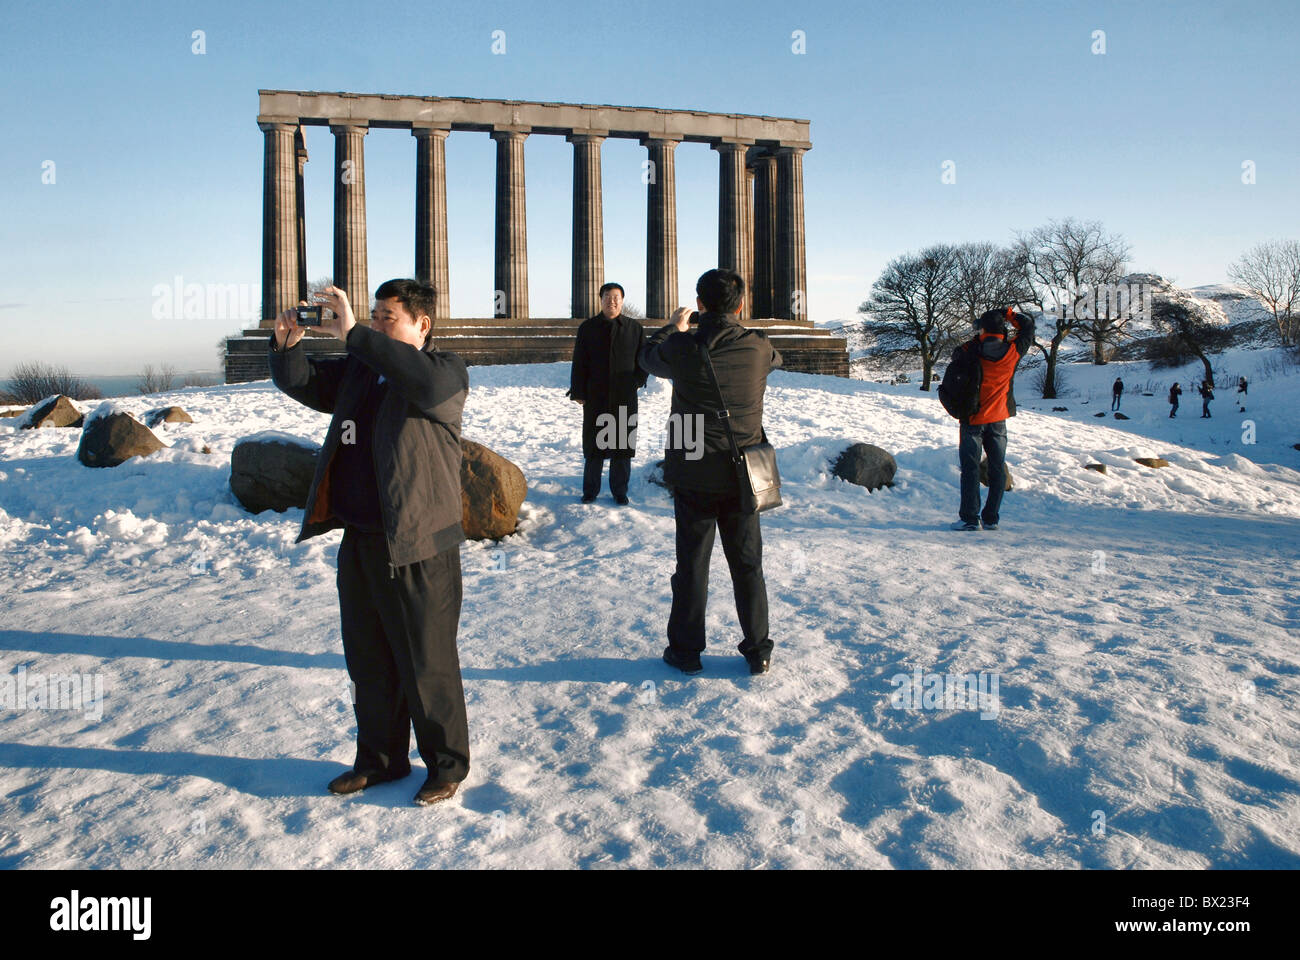 Tourists taking photographs at the National Monument on Calton Hill in Edinburgh after an early December snowfall. Stock Photo